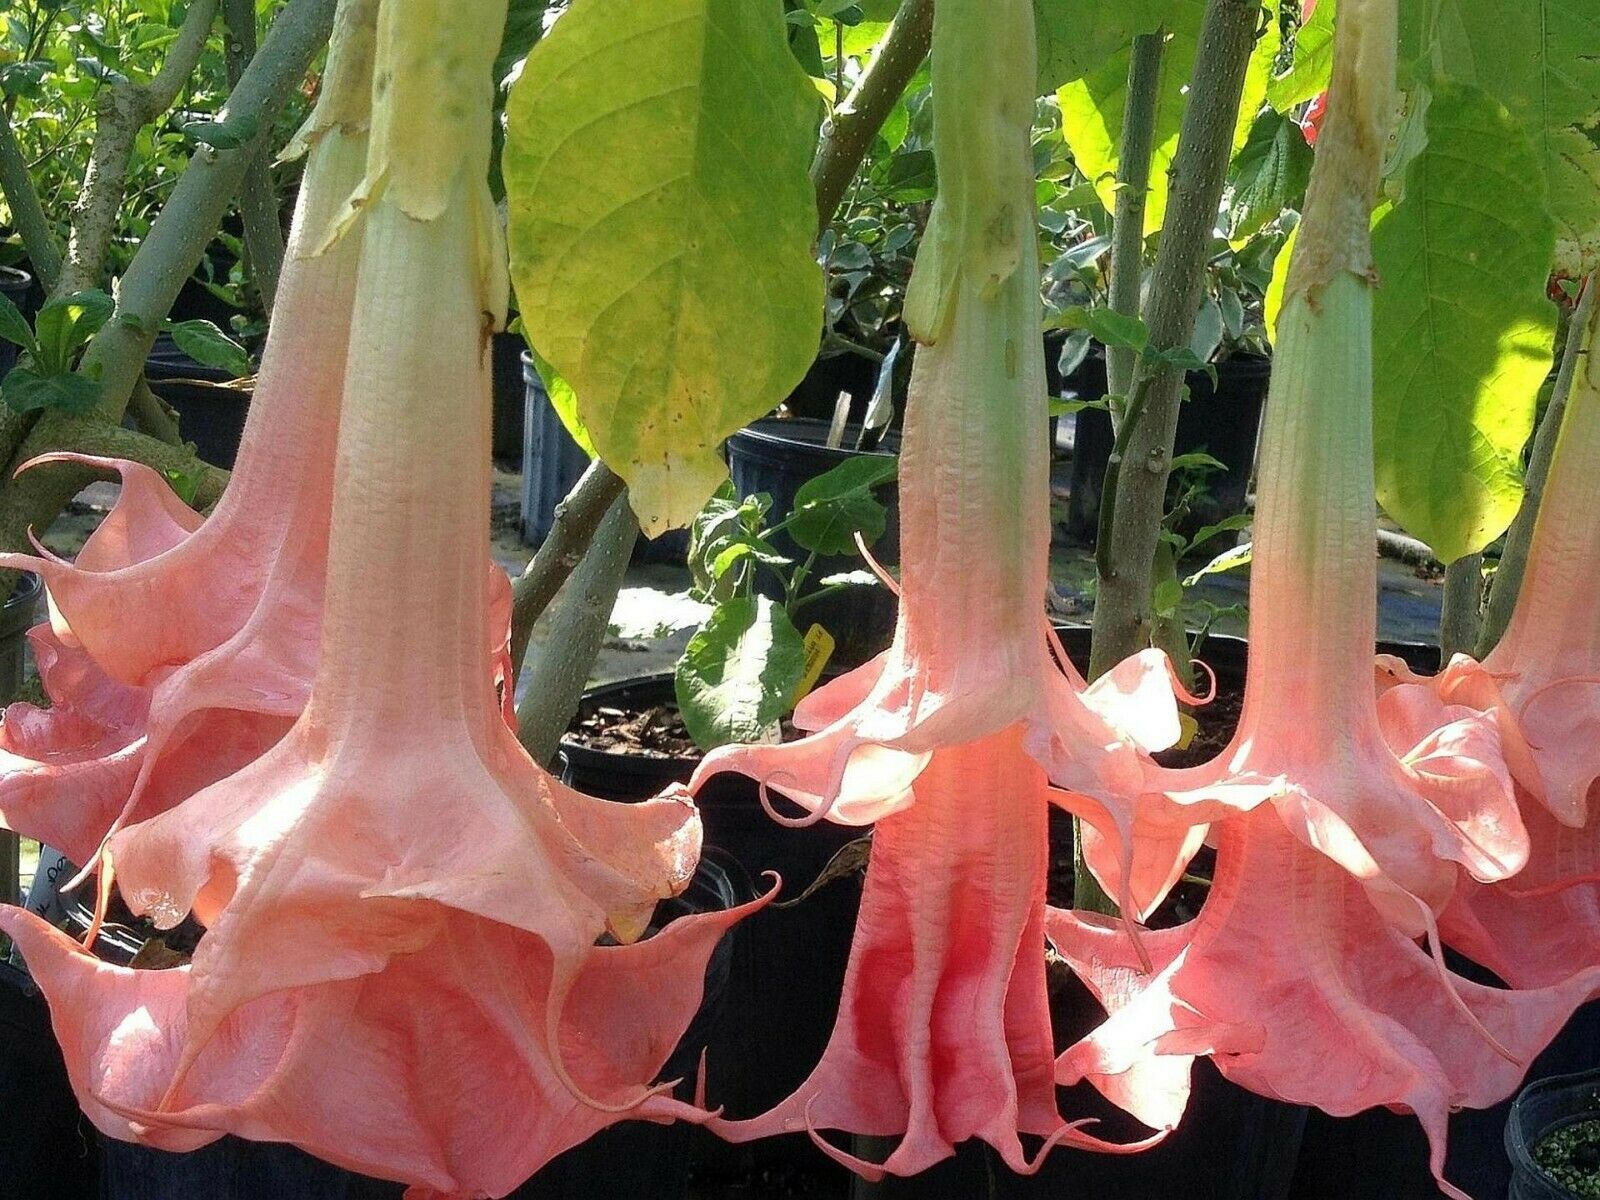 RED OTHERS ANGEL TRUMPET FLOWER DATURA PLANT SALE HERE ONLINE OZ Sunblest Products